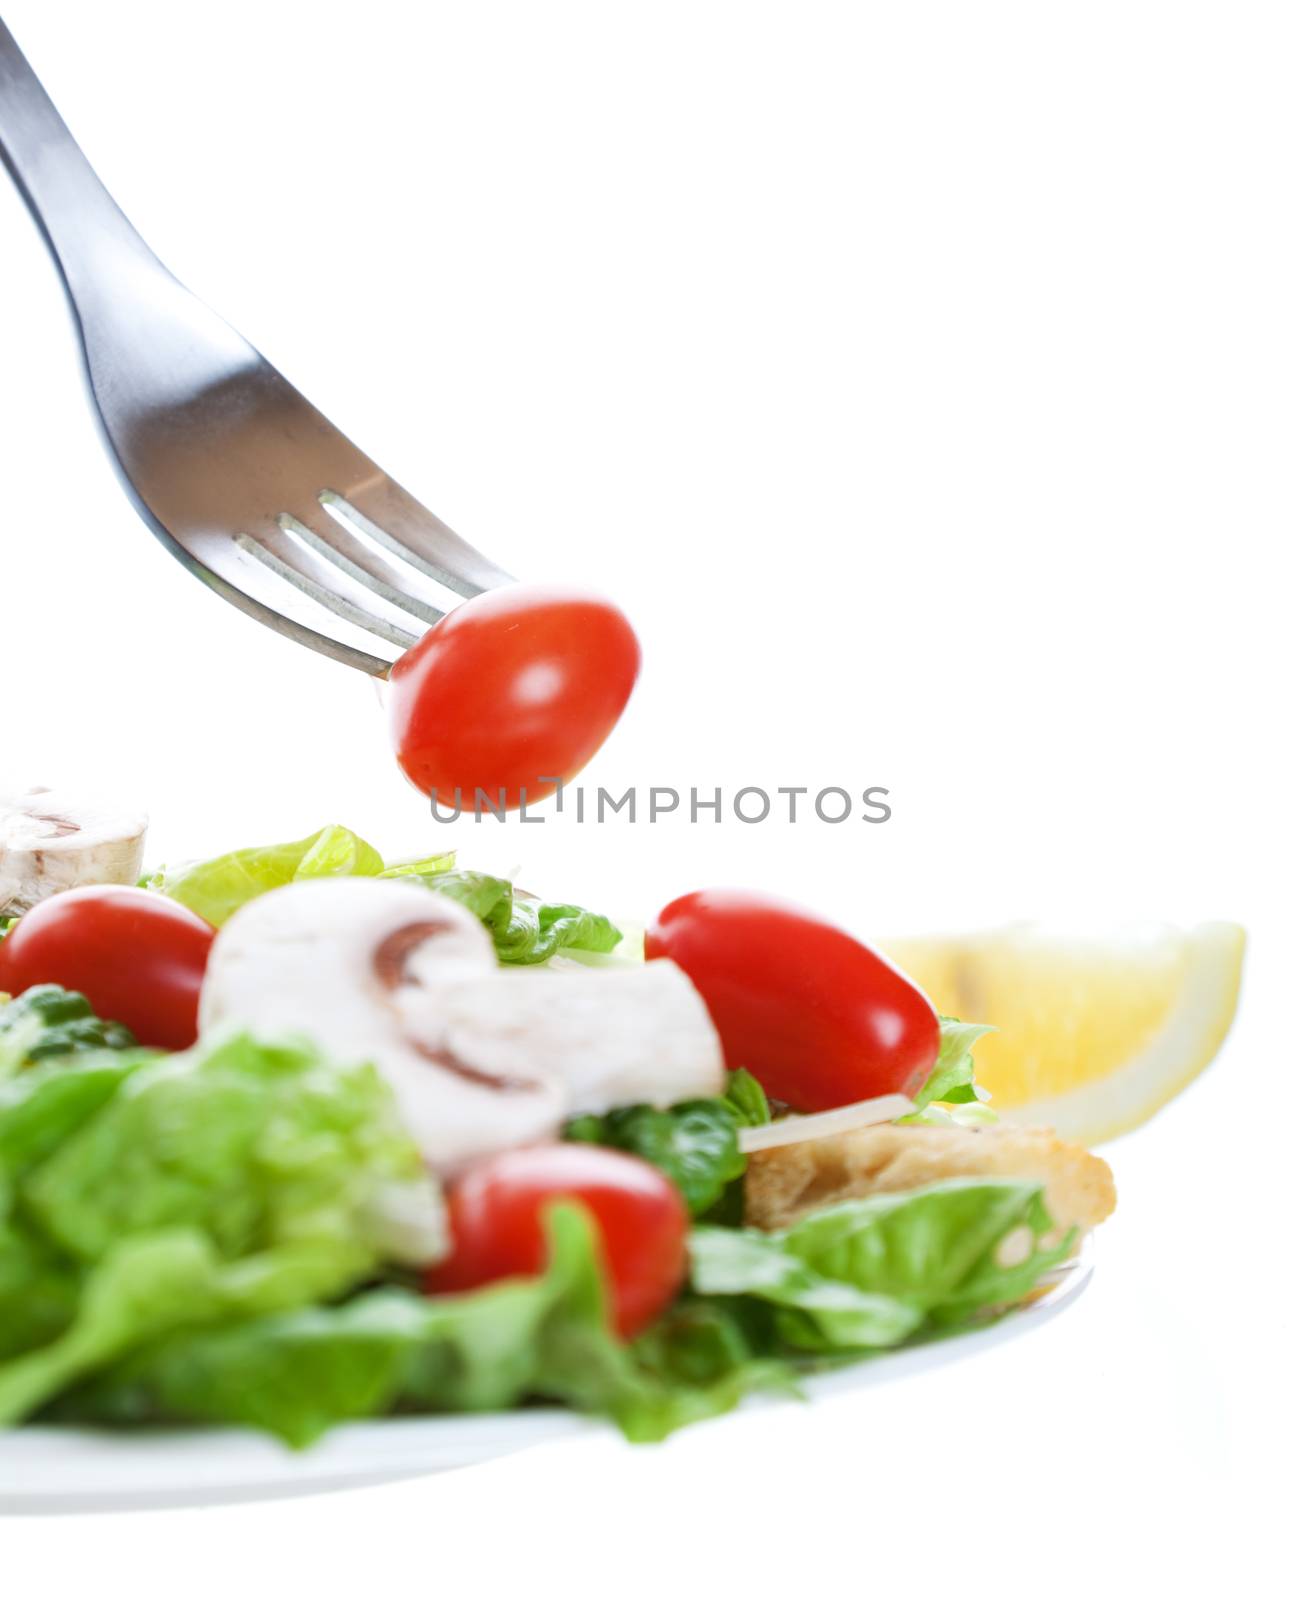 A cherry tomato on a fork above a freshly tossed salad.  Shot on white background.  Shallow depth of field.